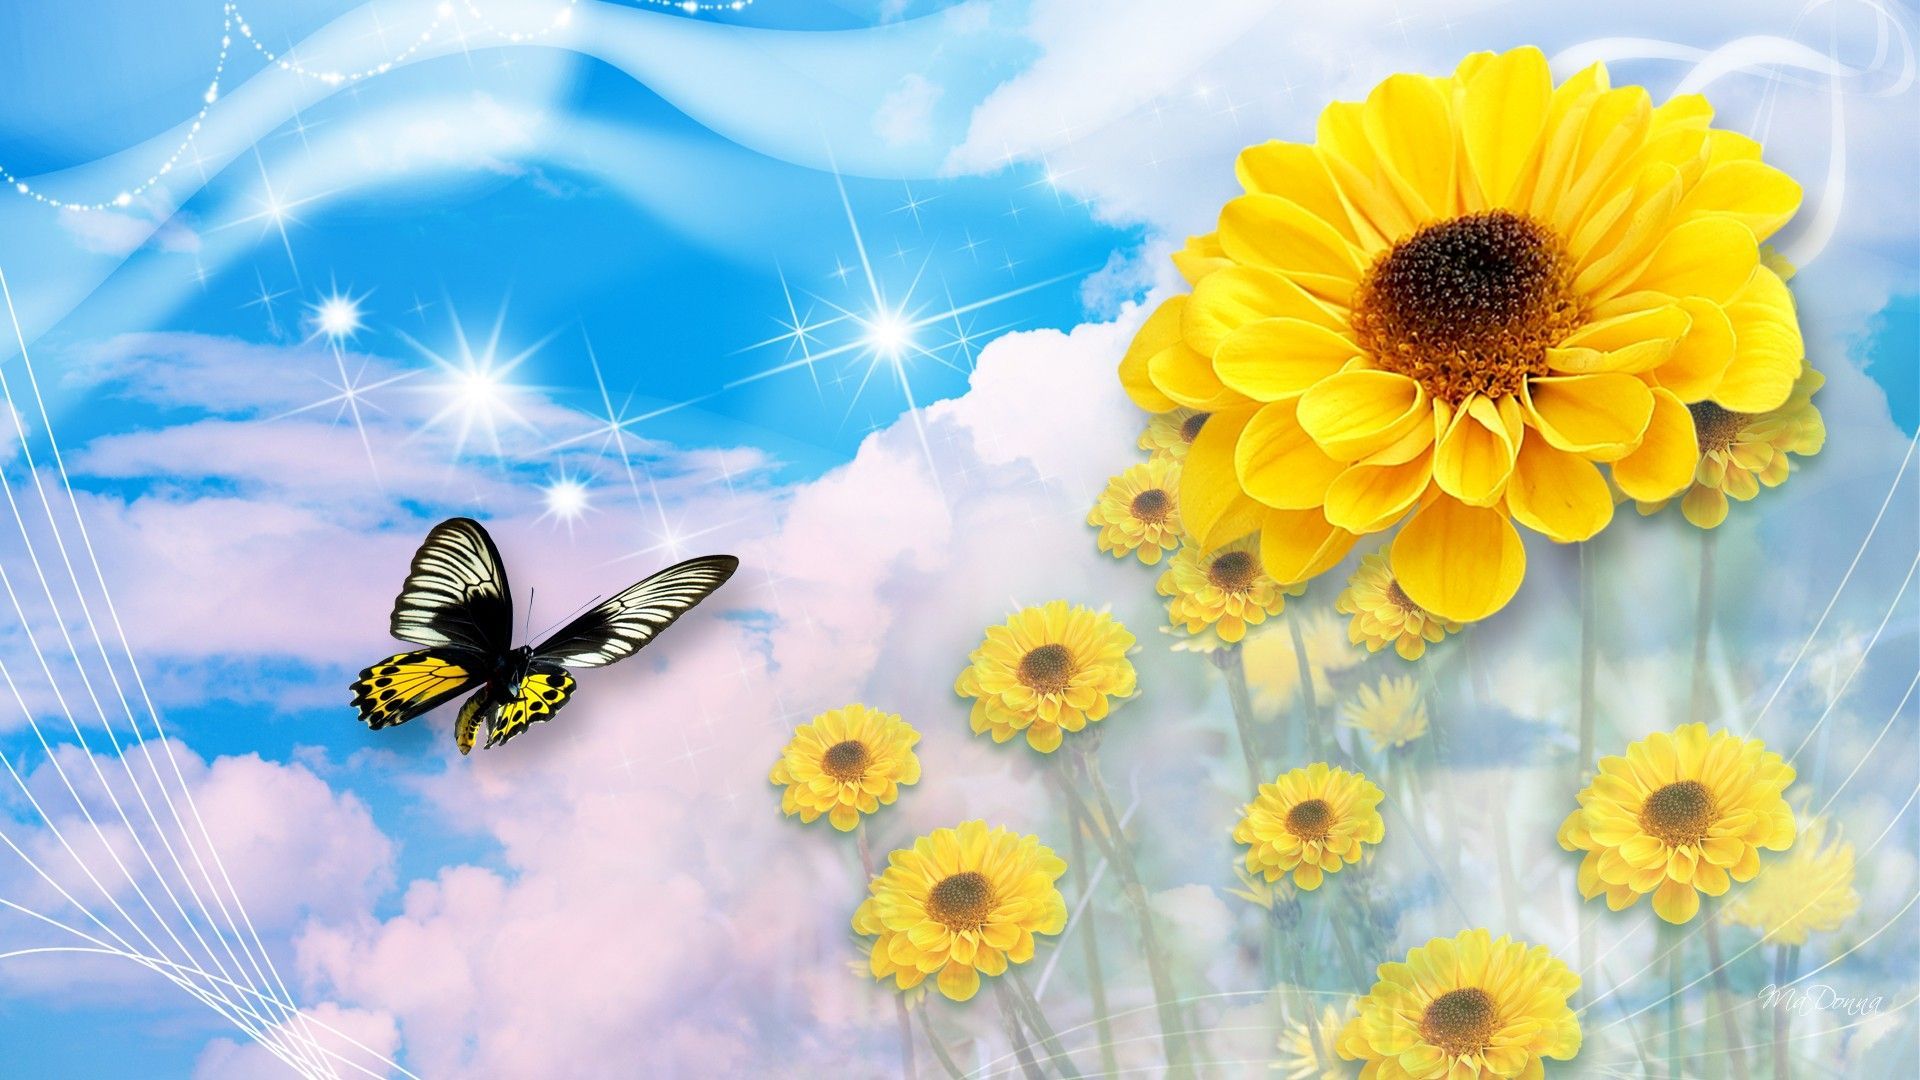 Summer Sky Dream HD Desktop Background - Funny And Amazing Wallpapers.